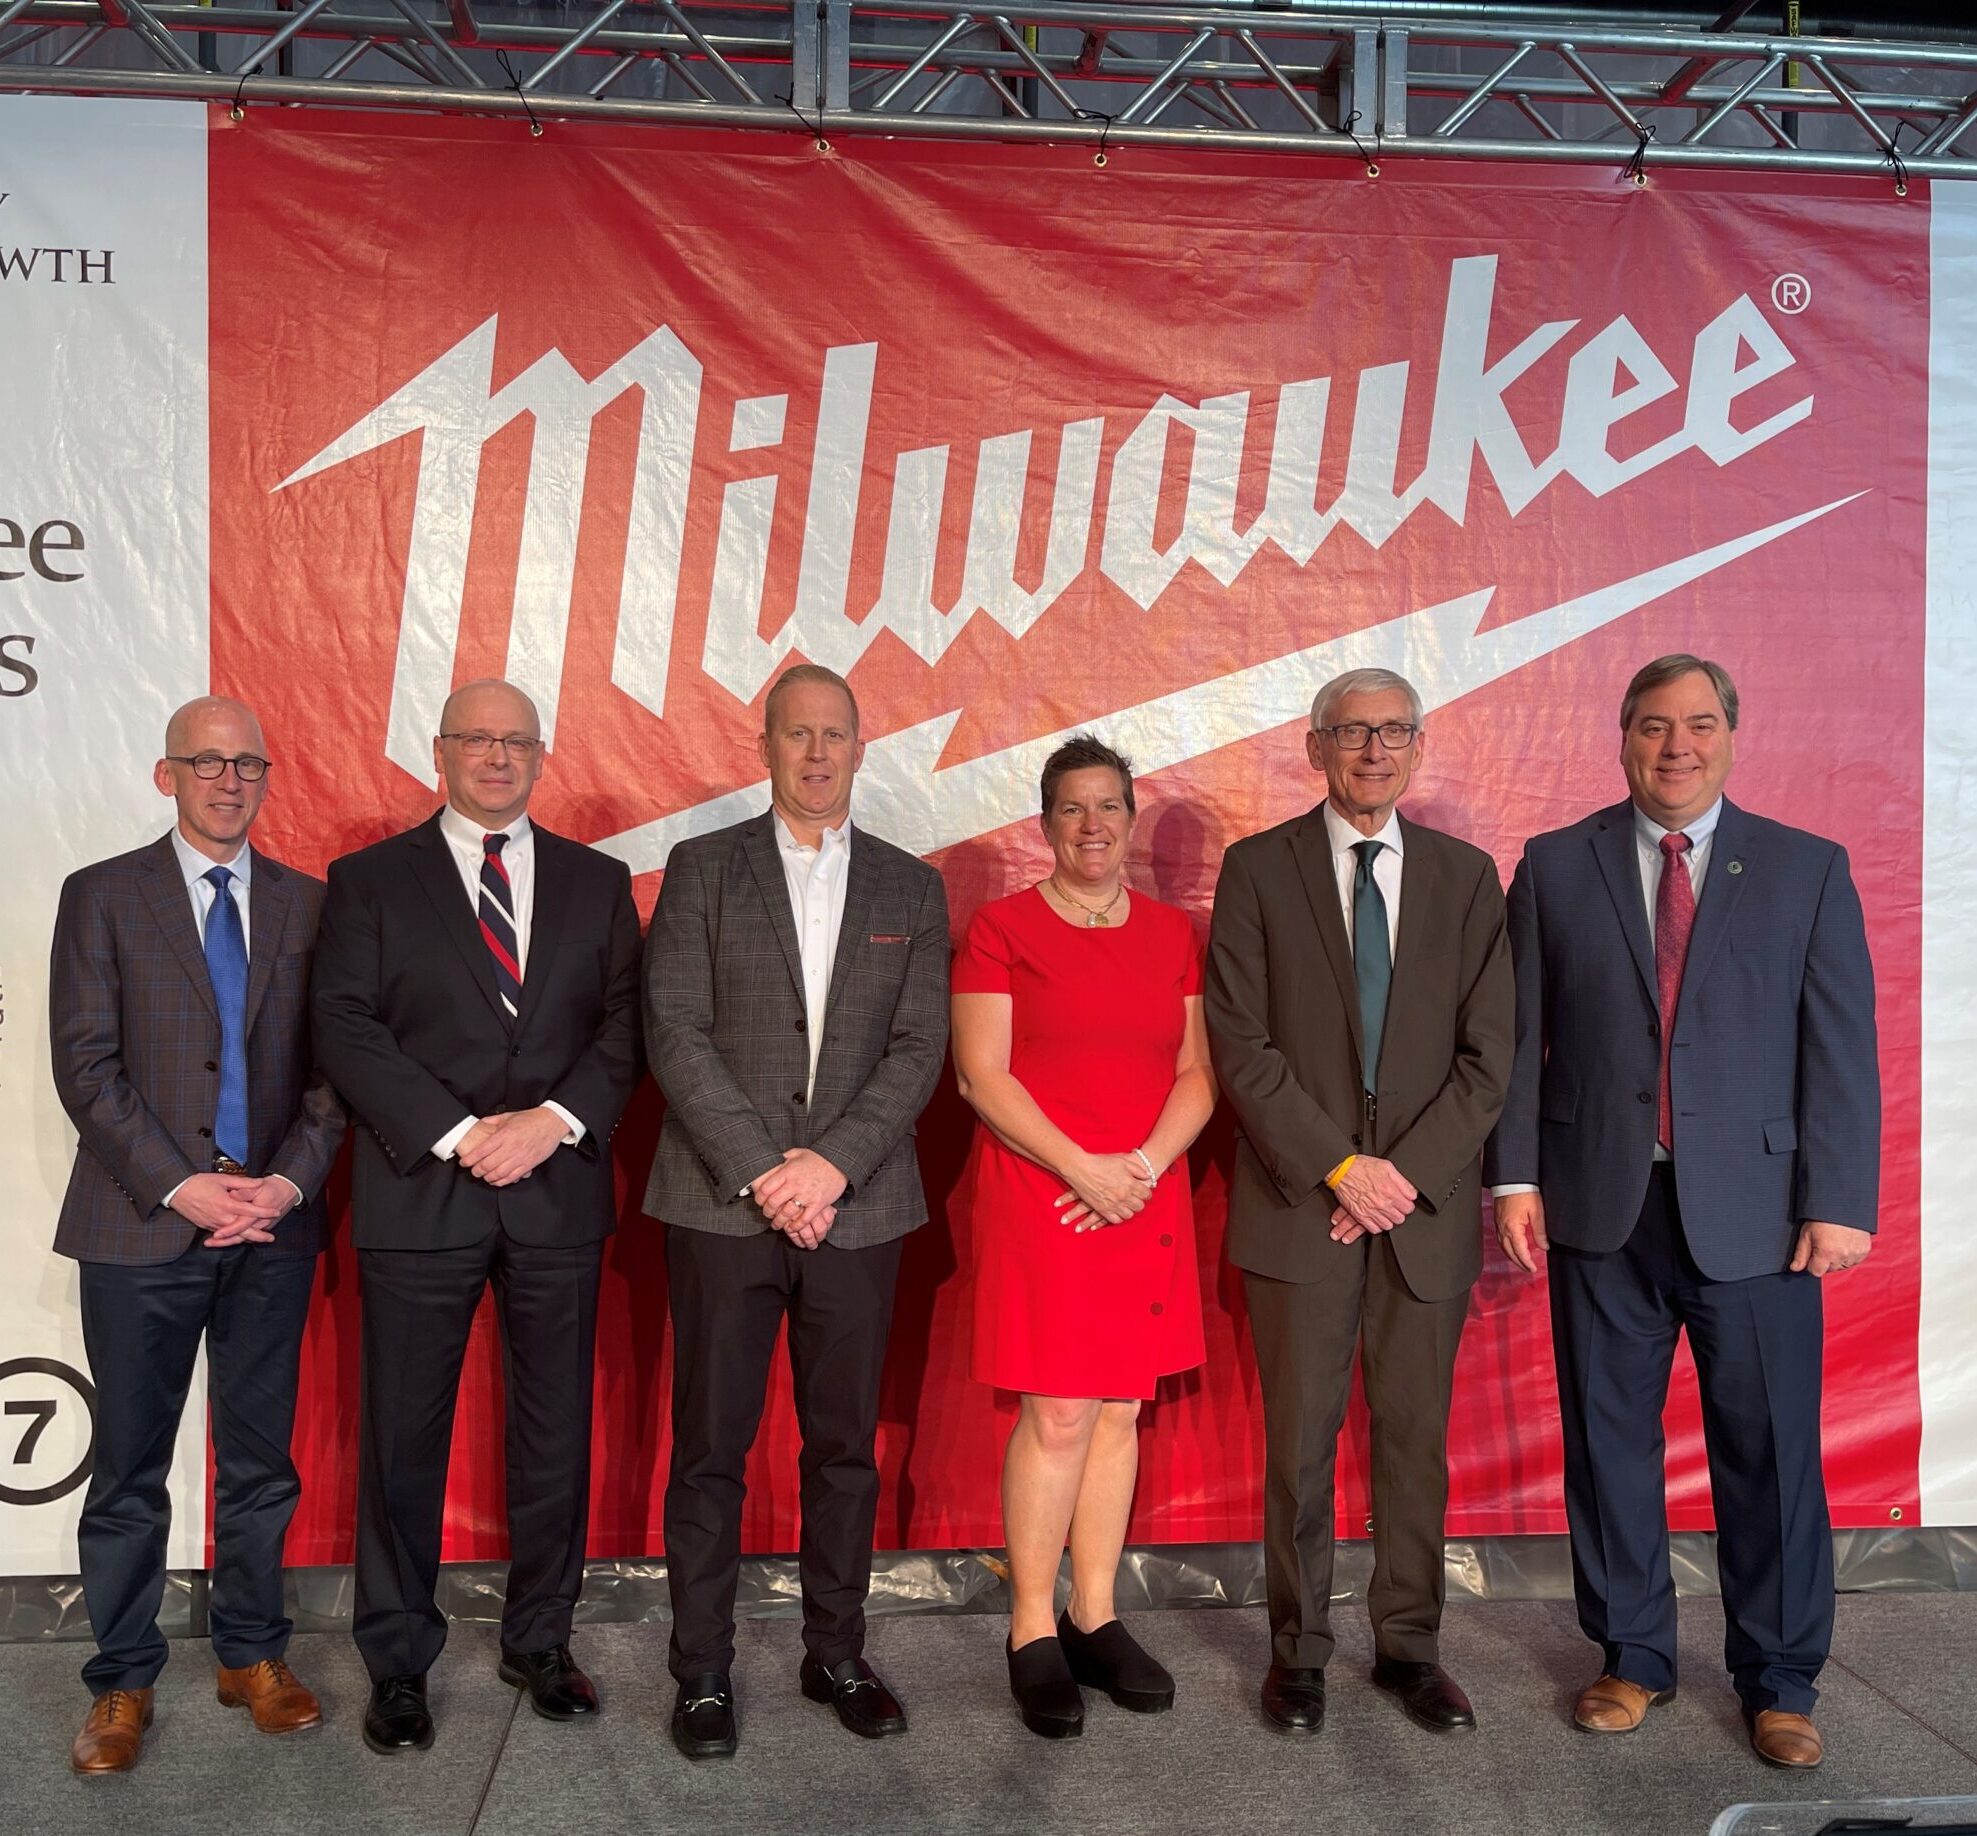 Five men and one woman stand in front of a banner.